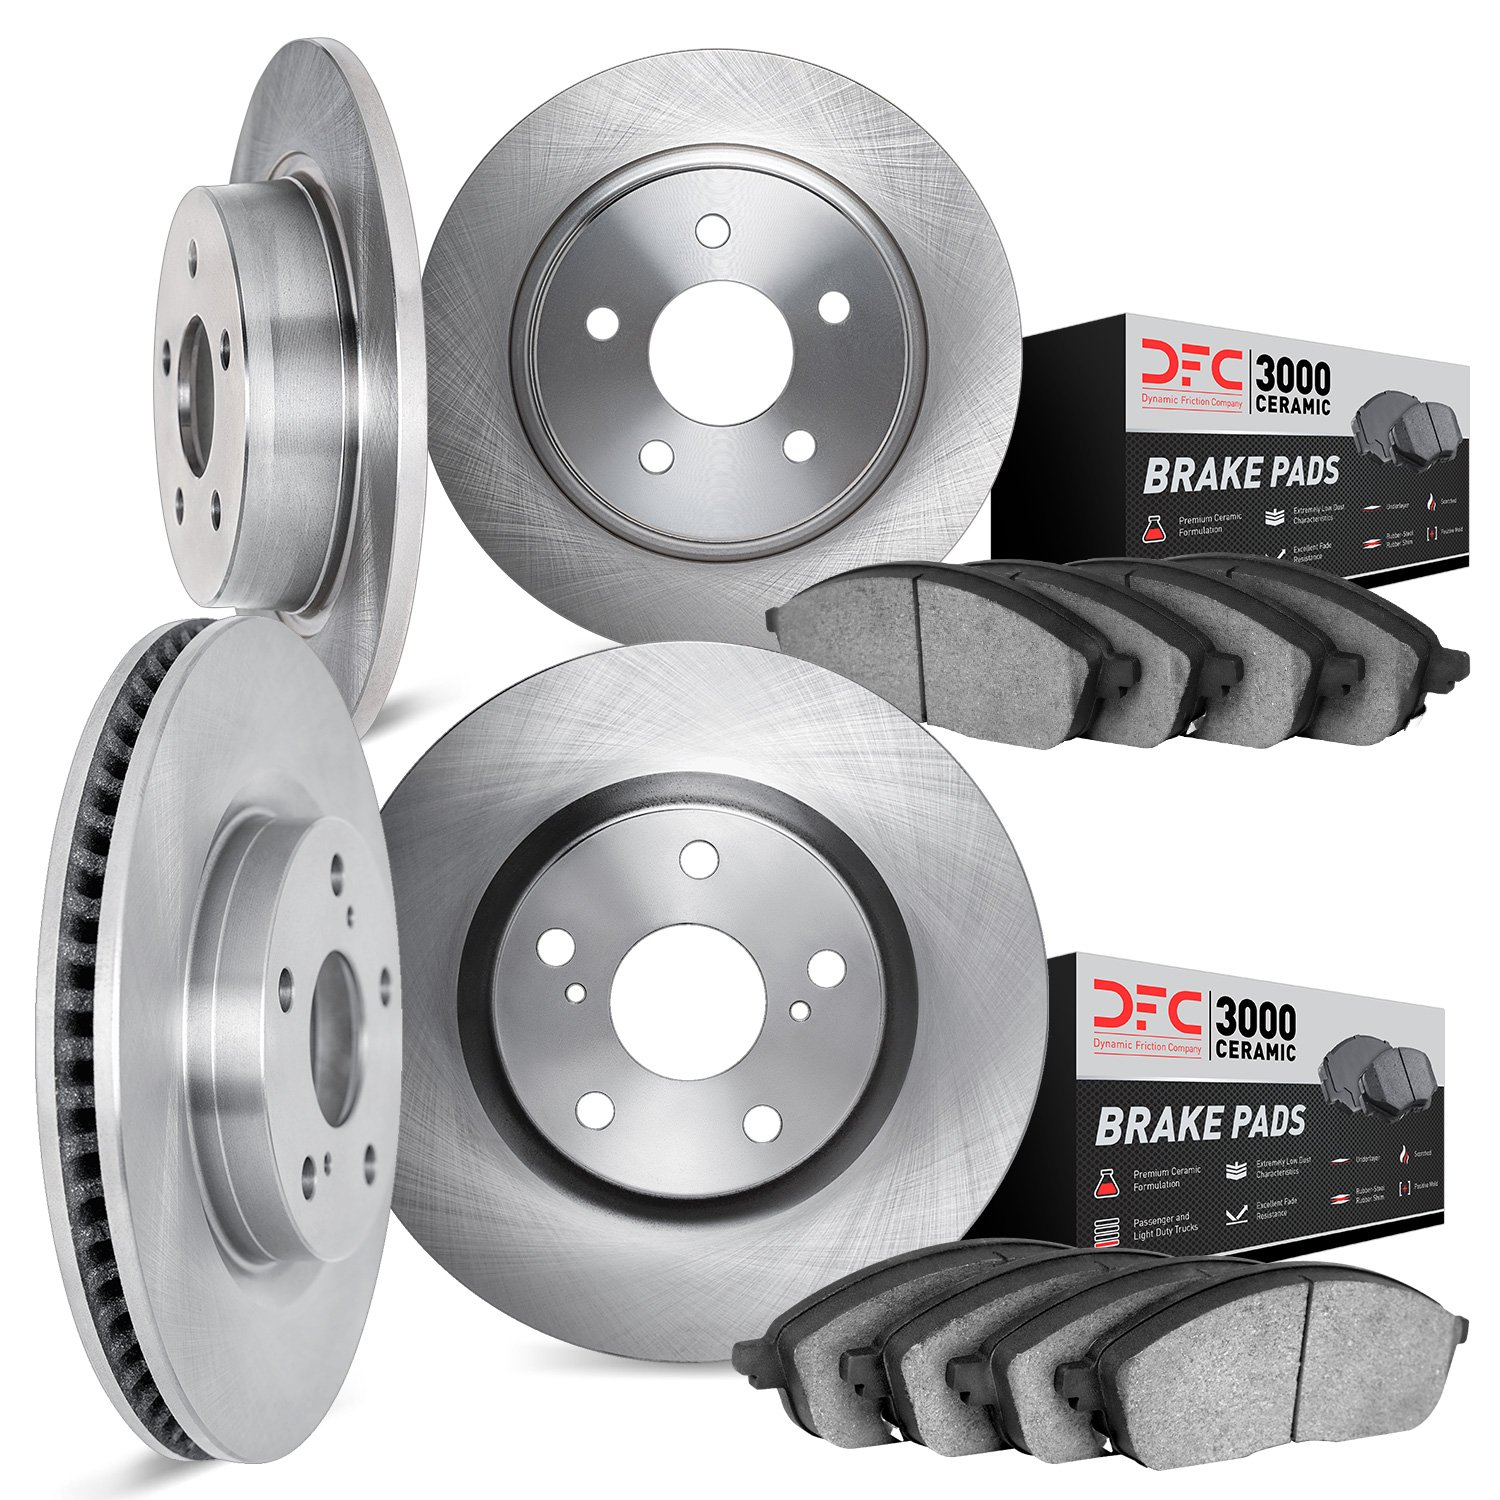 6304-59087 Brake Rotors with 3000-Series Ceramic Brake Pads Kit, Fits Select Acura/Honda, Position: Front and Rear